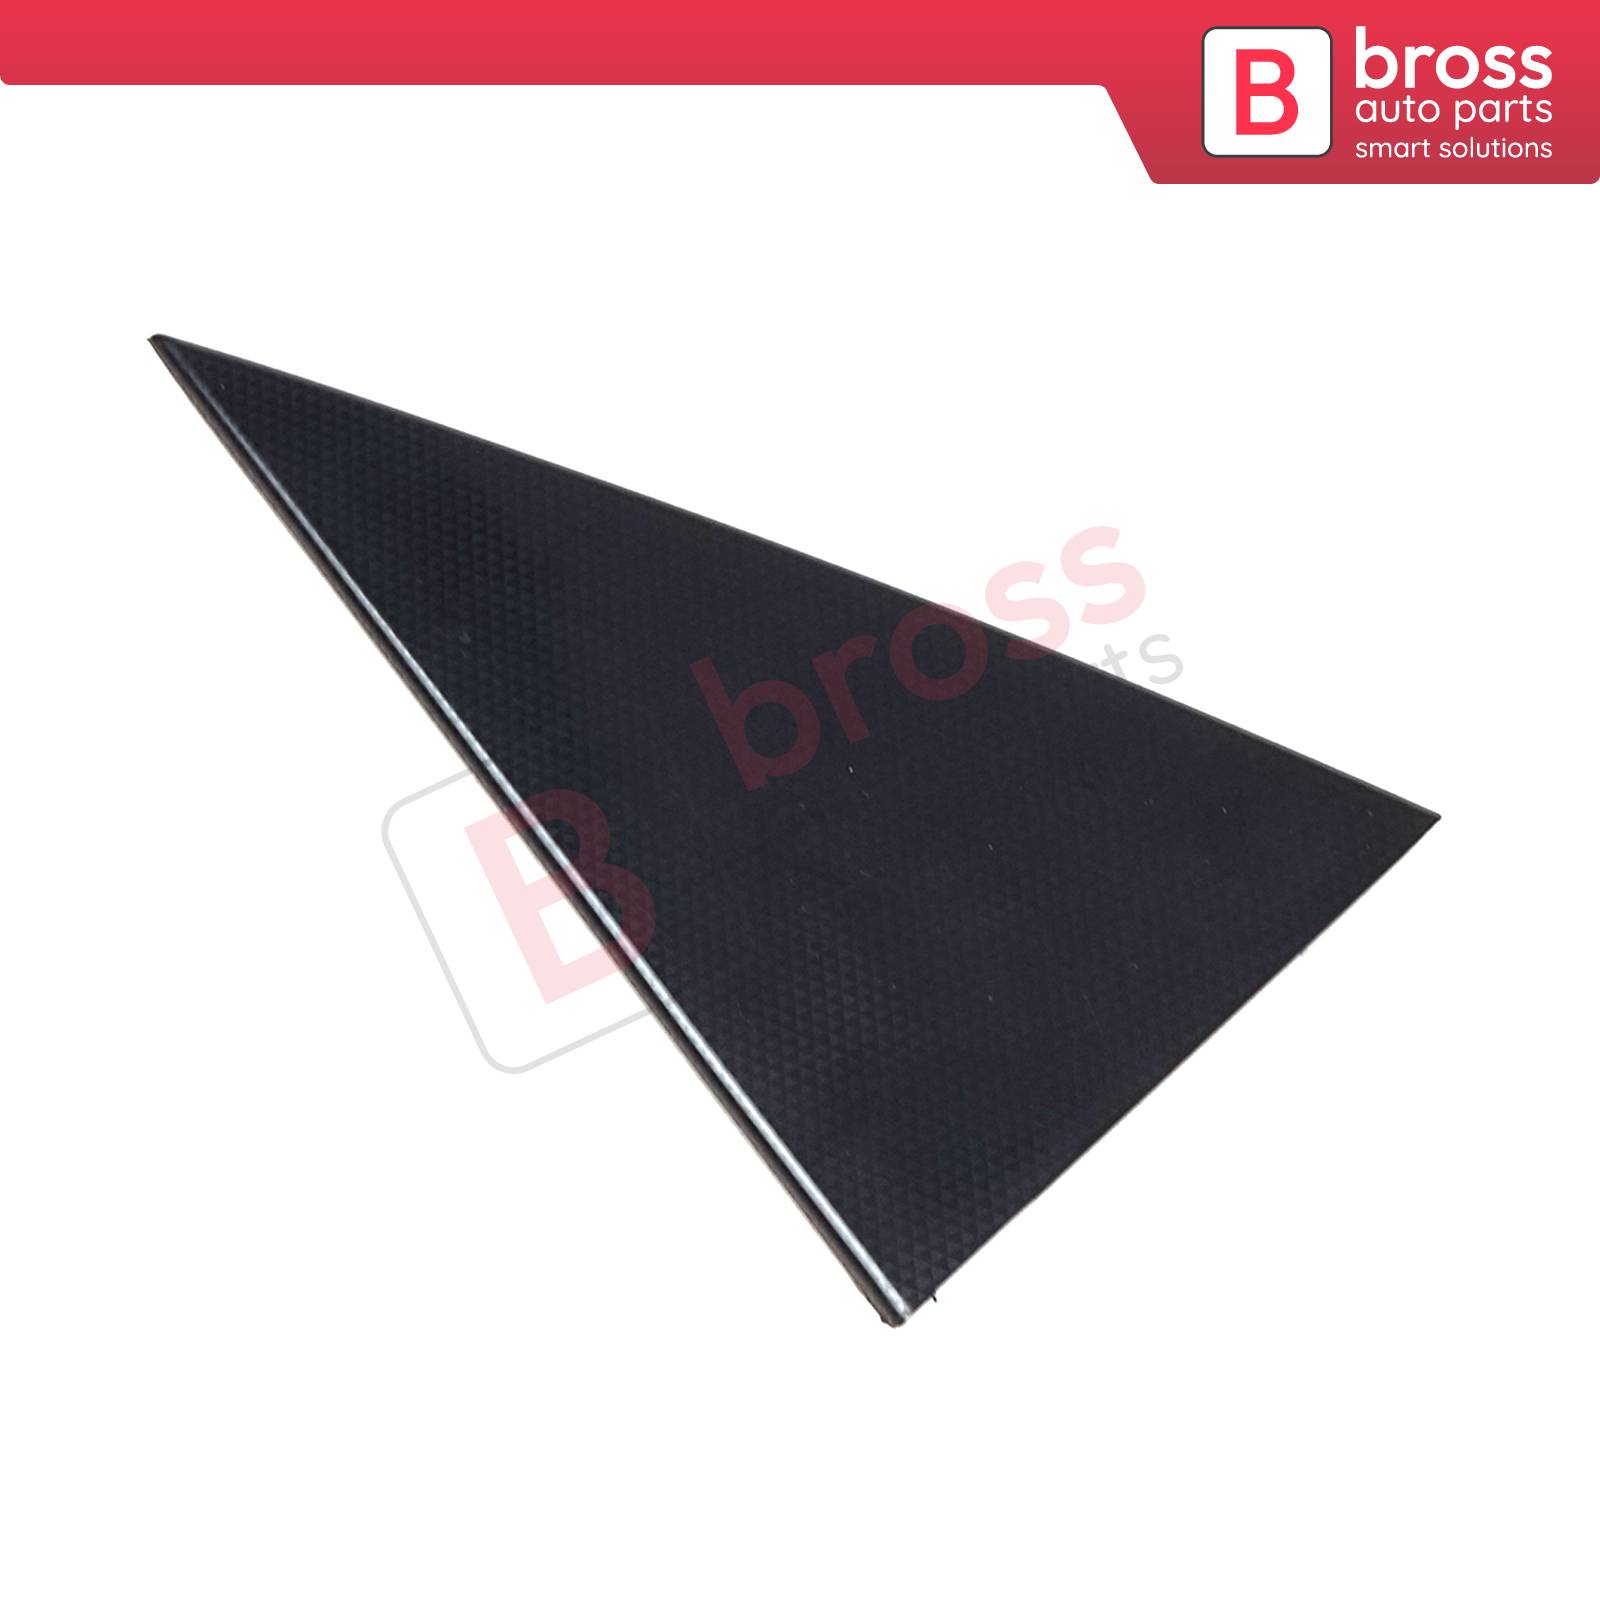 Rear Left Door Window Outer Corner Frame Triangle Molding 90524879 for Vauxhall Opel Vectra B 1995-2002